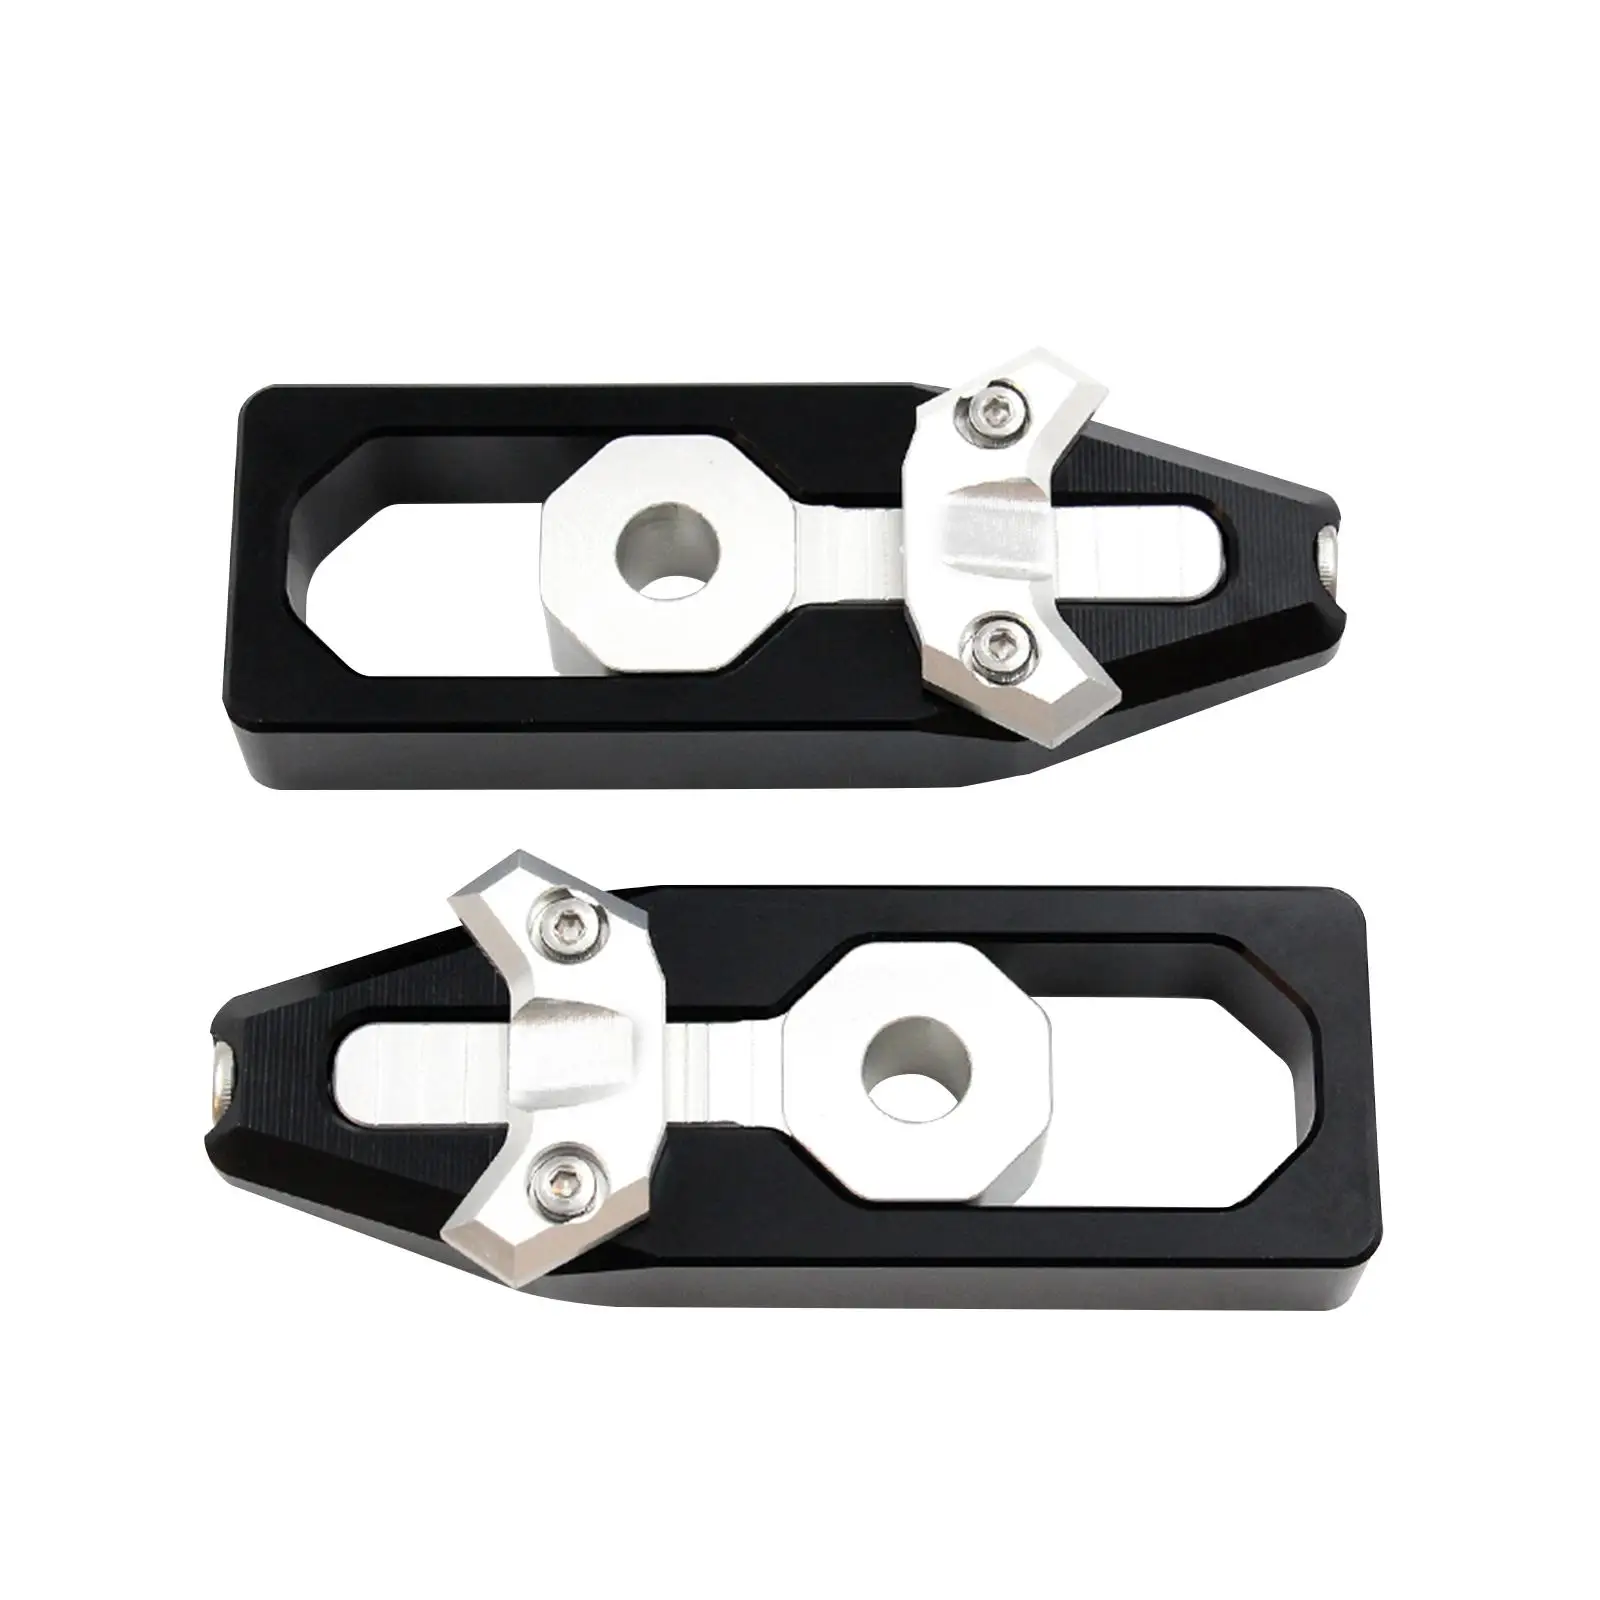 2 Pieces Motorcycle Chain Adjusting Tool Multifunction Chain Adjuster Chain